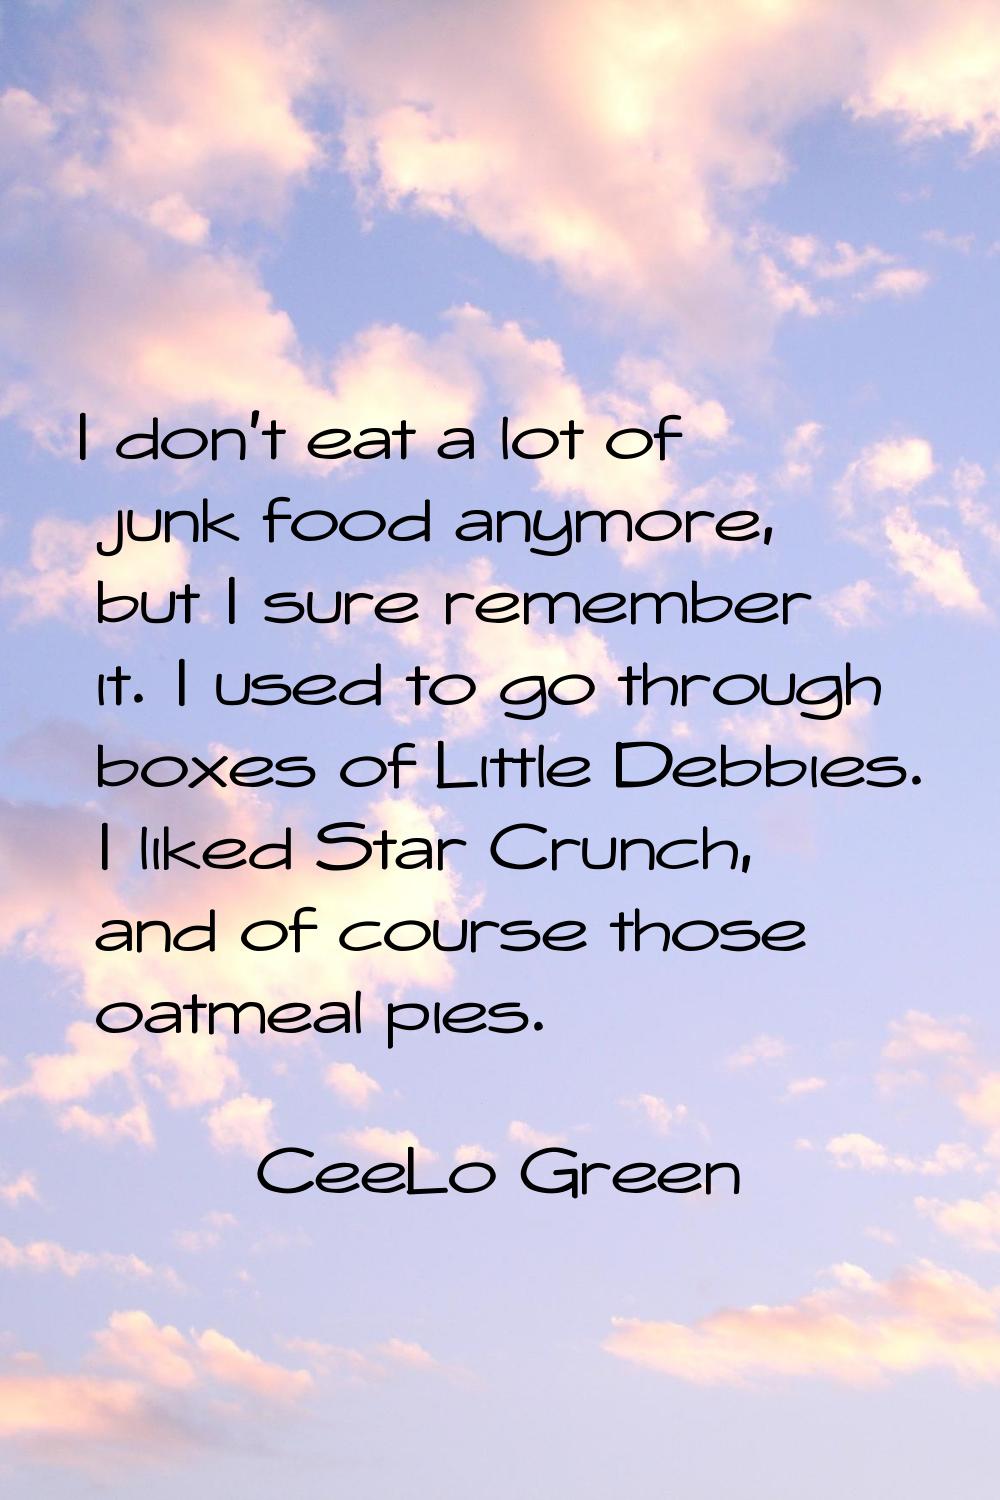 I don't eat a lot of junk food anymore, but I sure remember it. I used to go through boxes of Littl